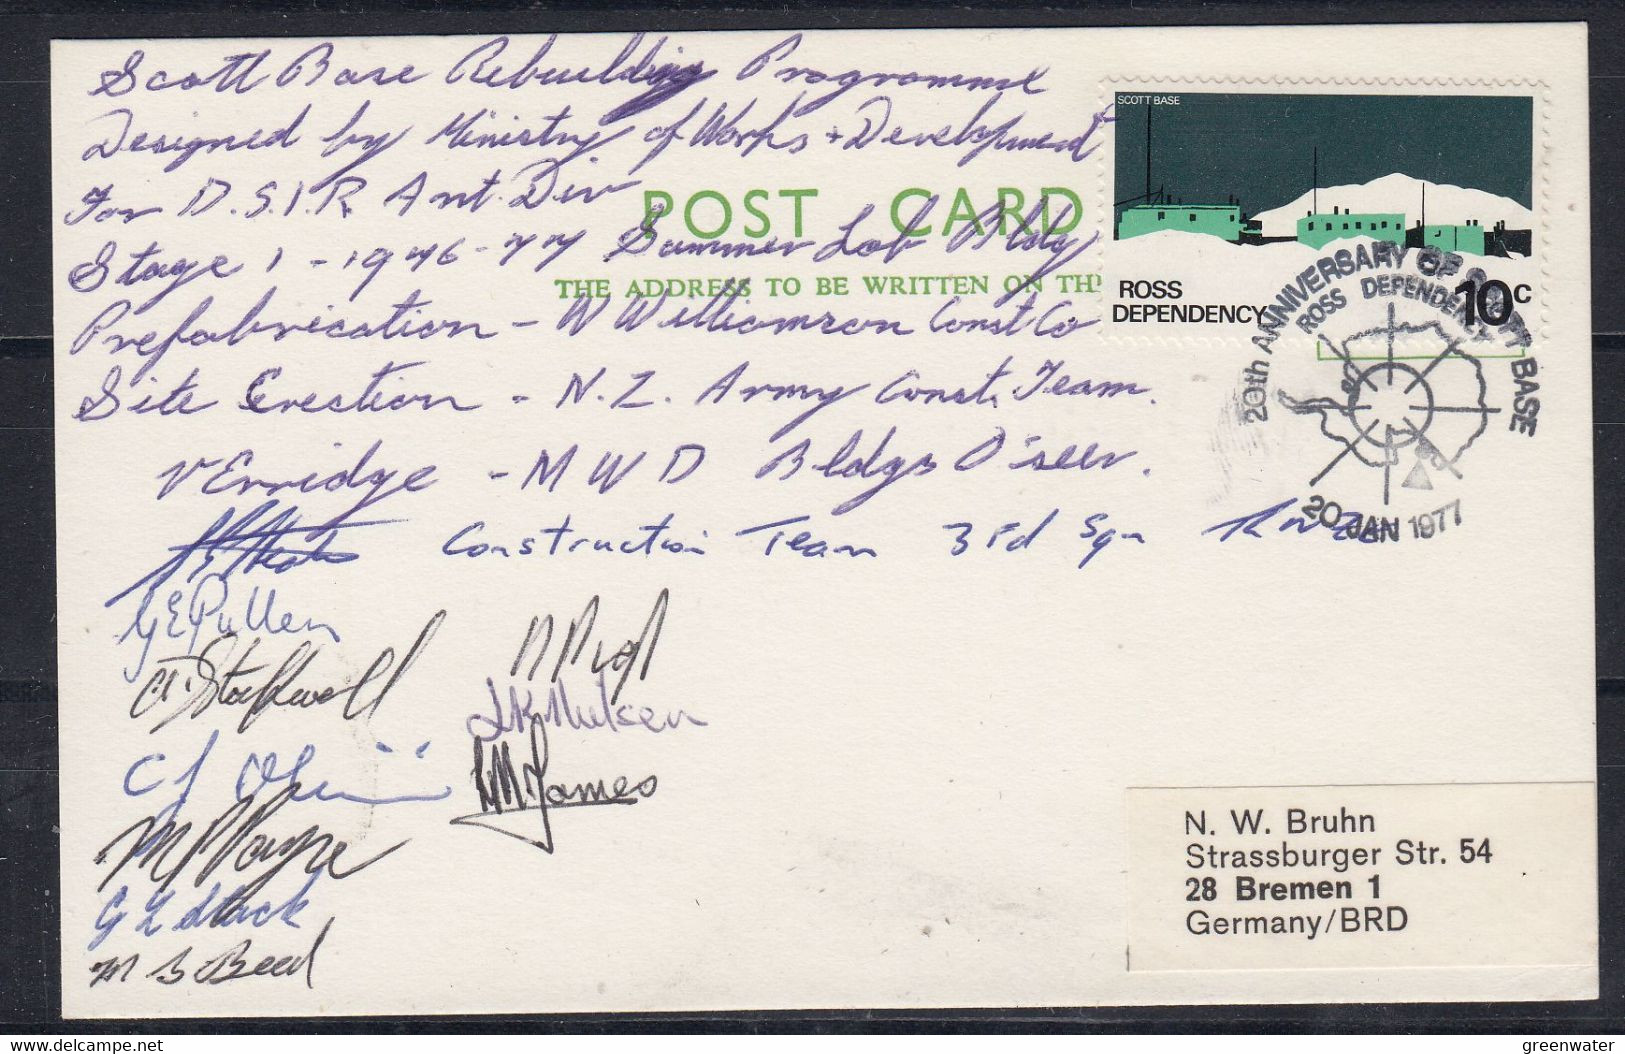 Ross Dependency 1977 Card Scott Base Rebuilding Programme With 10 Signatures Of Members Construction Team (52543) - Covers & Documents